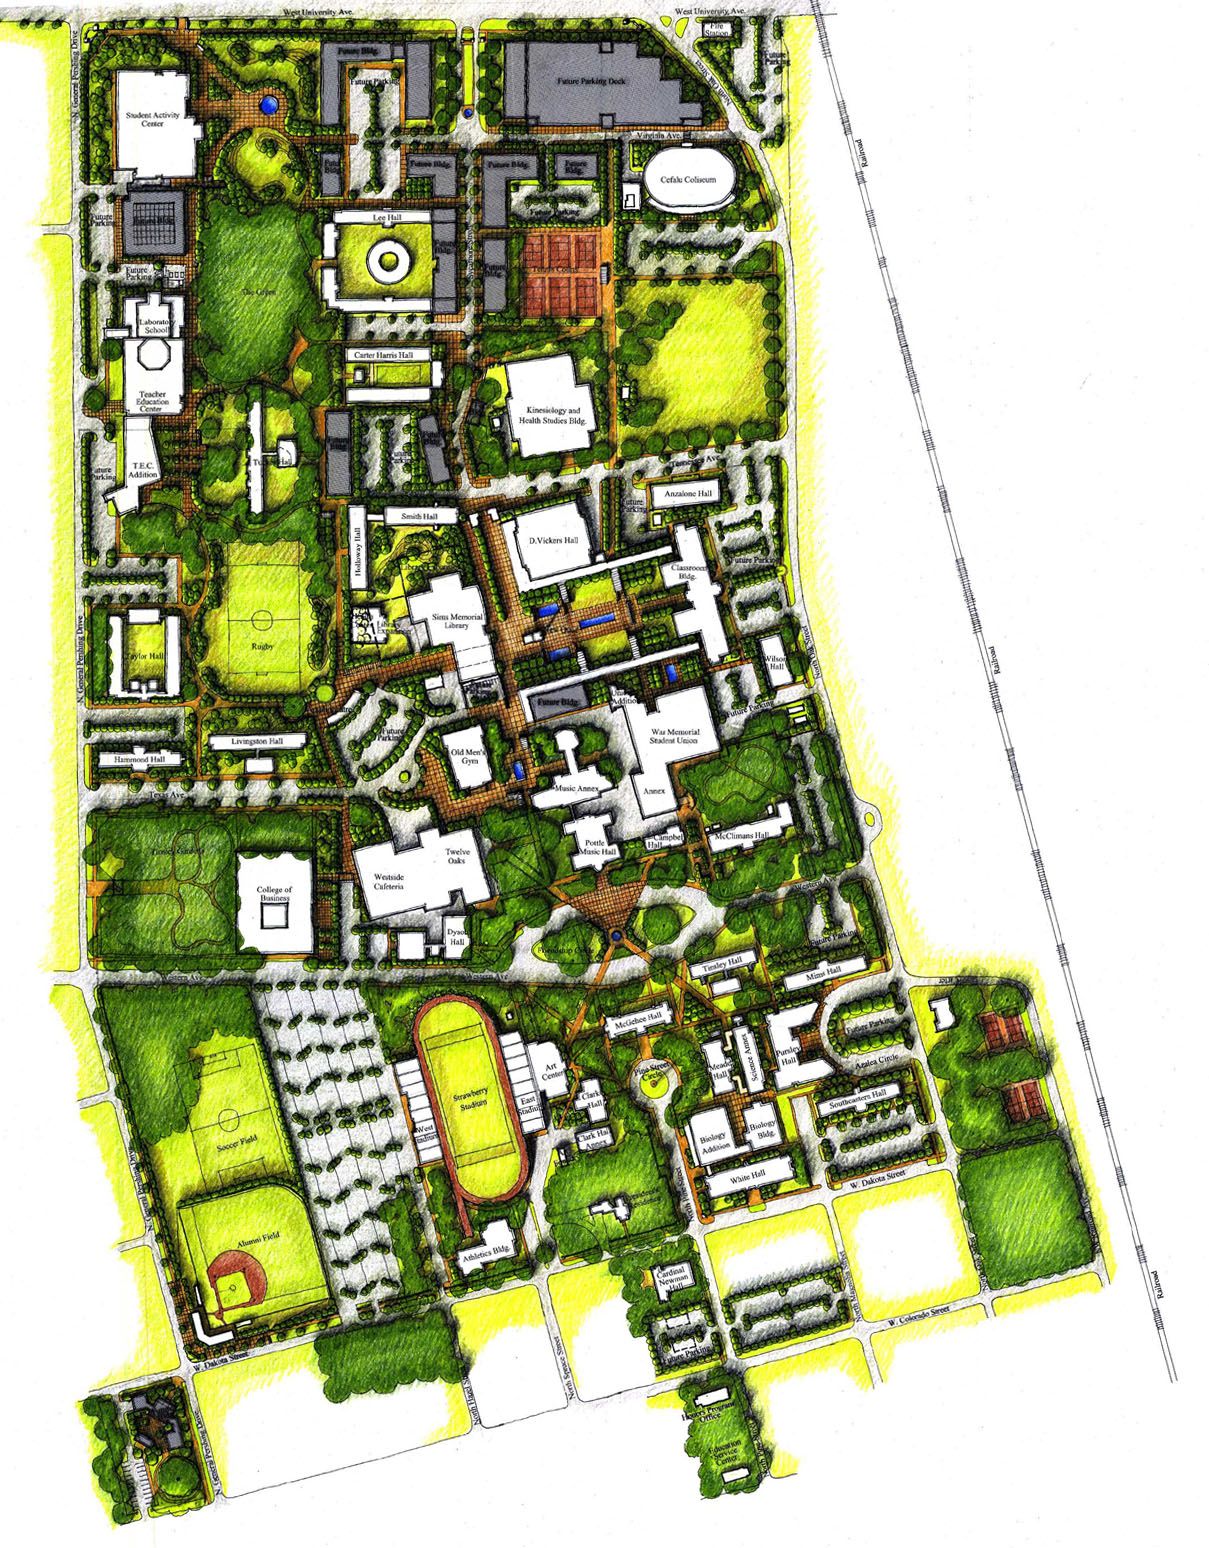 Holly & Smith Architects and the Southeastern Facilities Master Plan 1996 – 2021